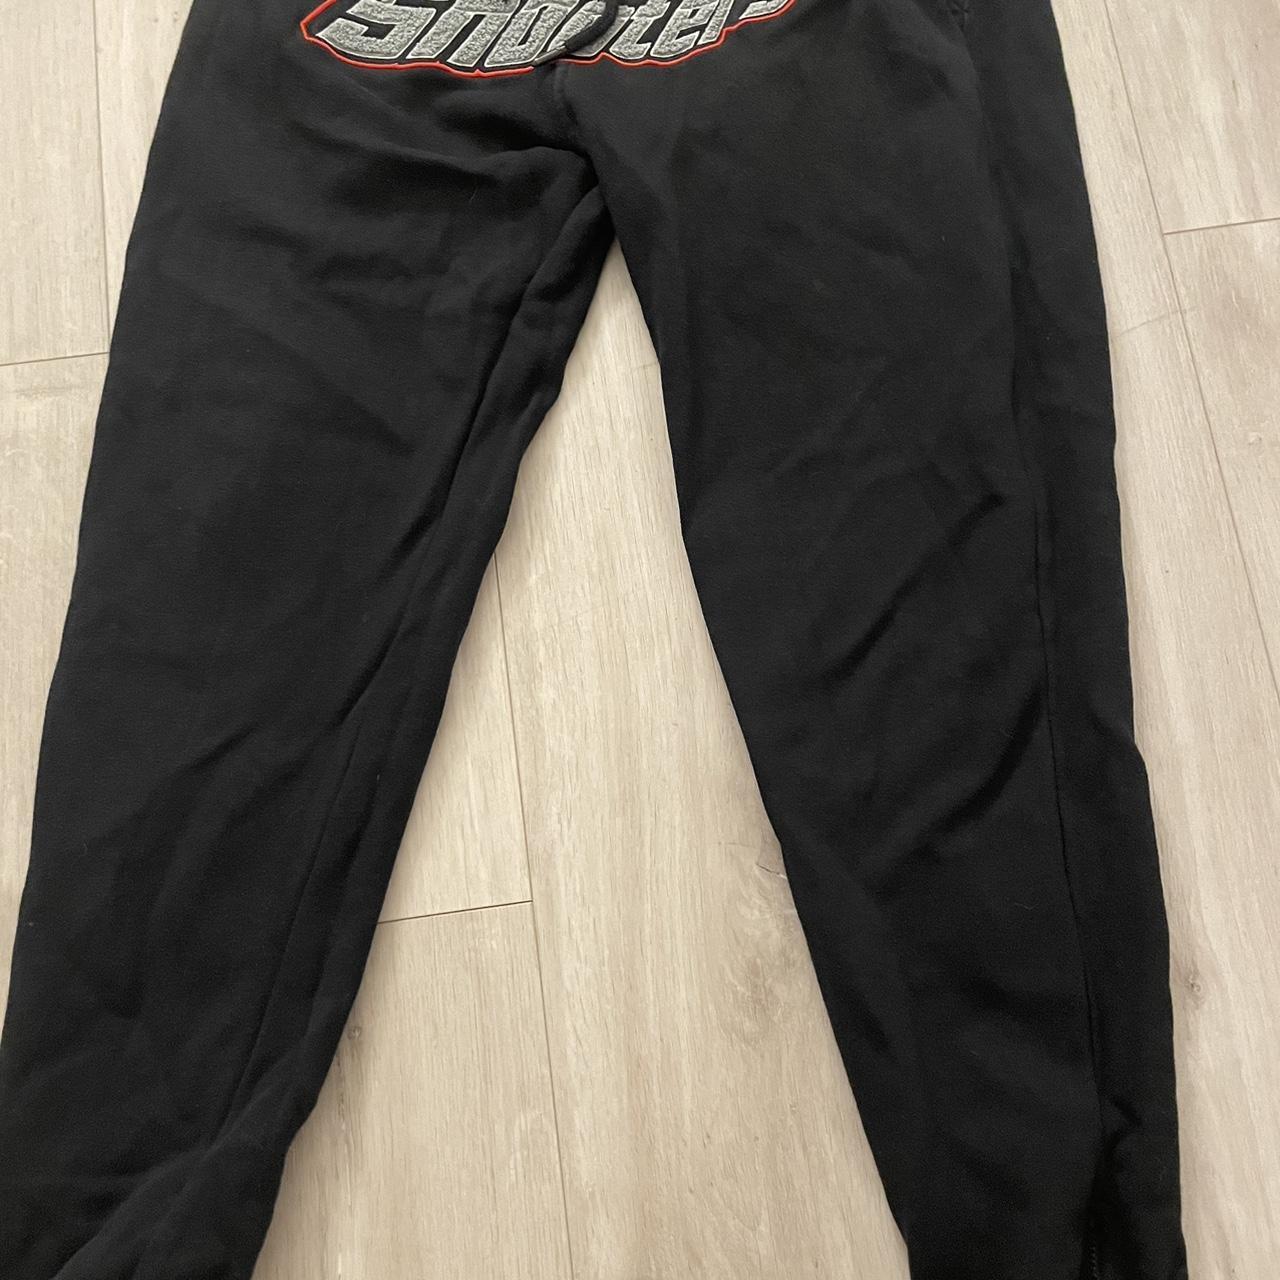 Trapstar joggers Only worn a few times Pu for offers - Depop